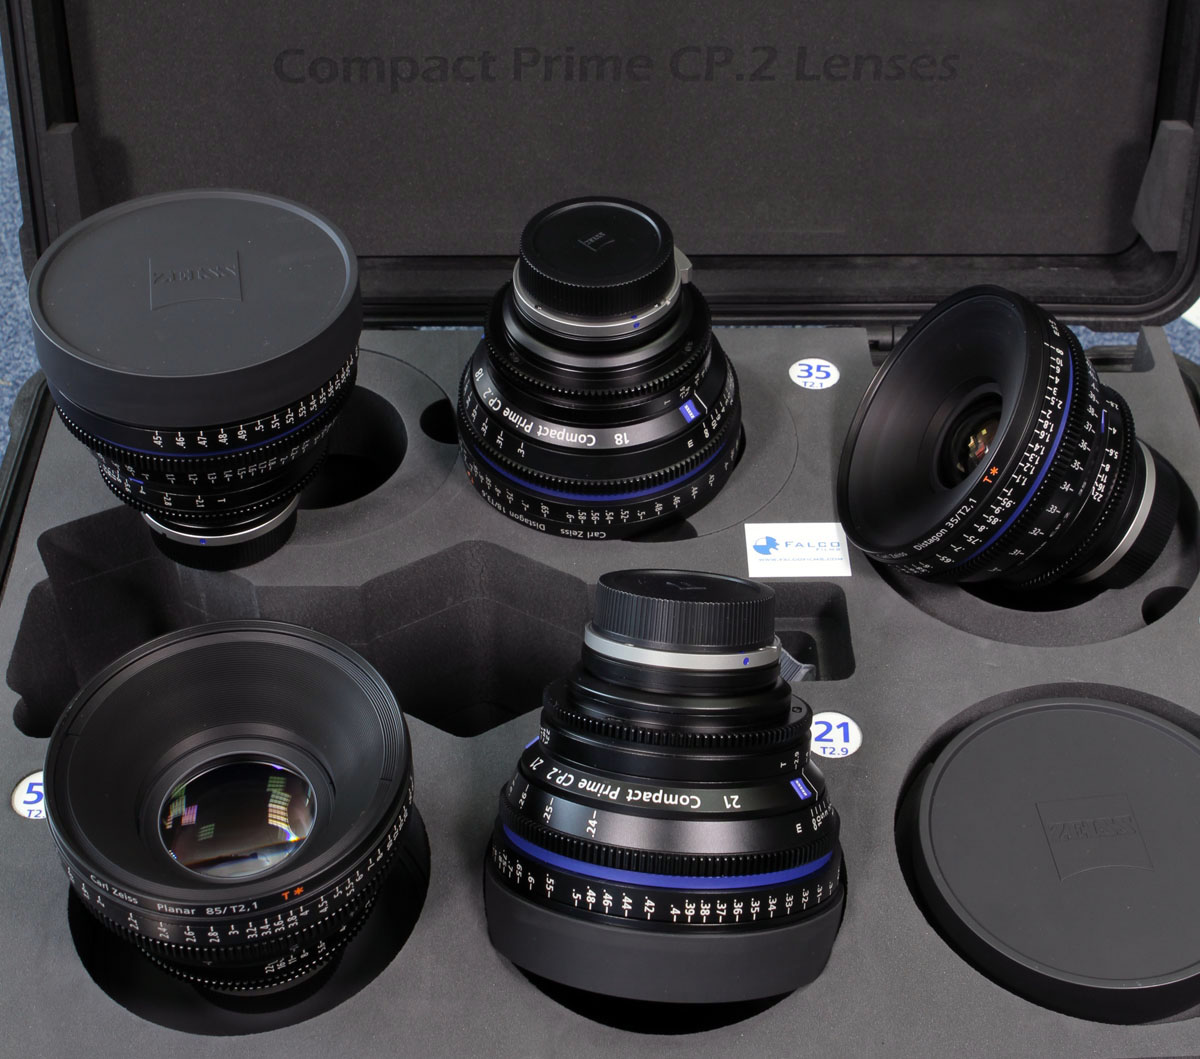 ZEISS COMPACT PRIME CP.2 25mm T2.9